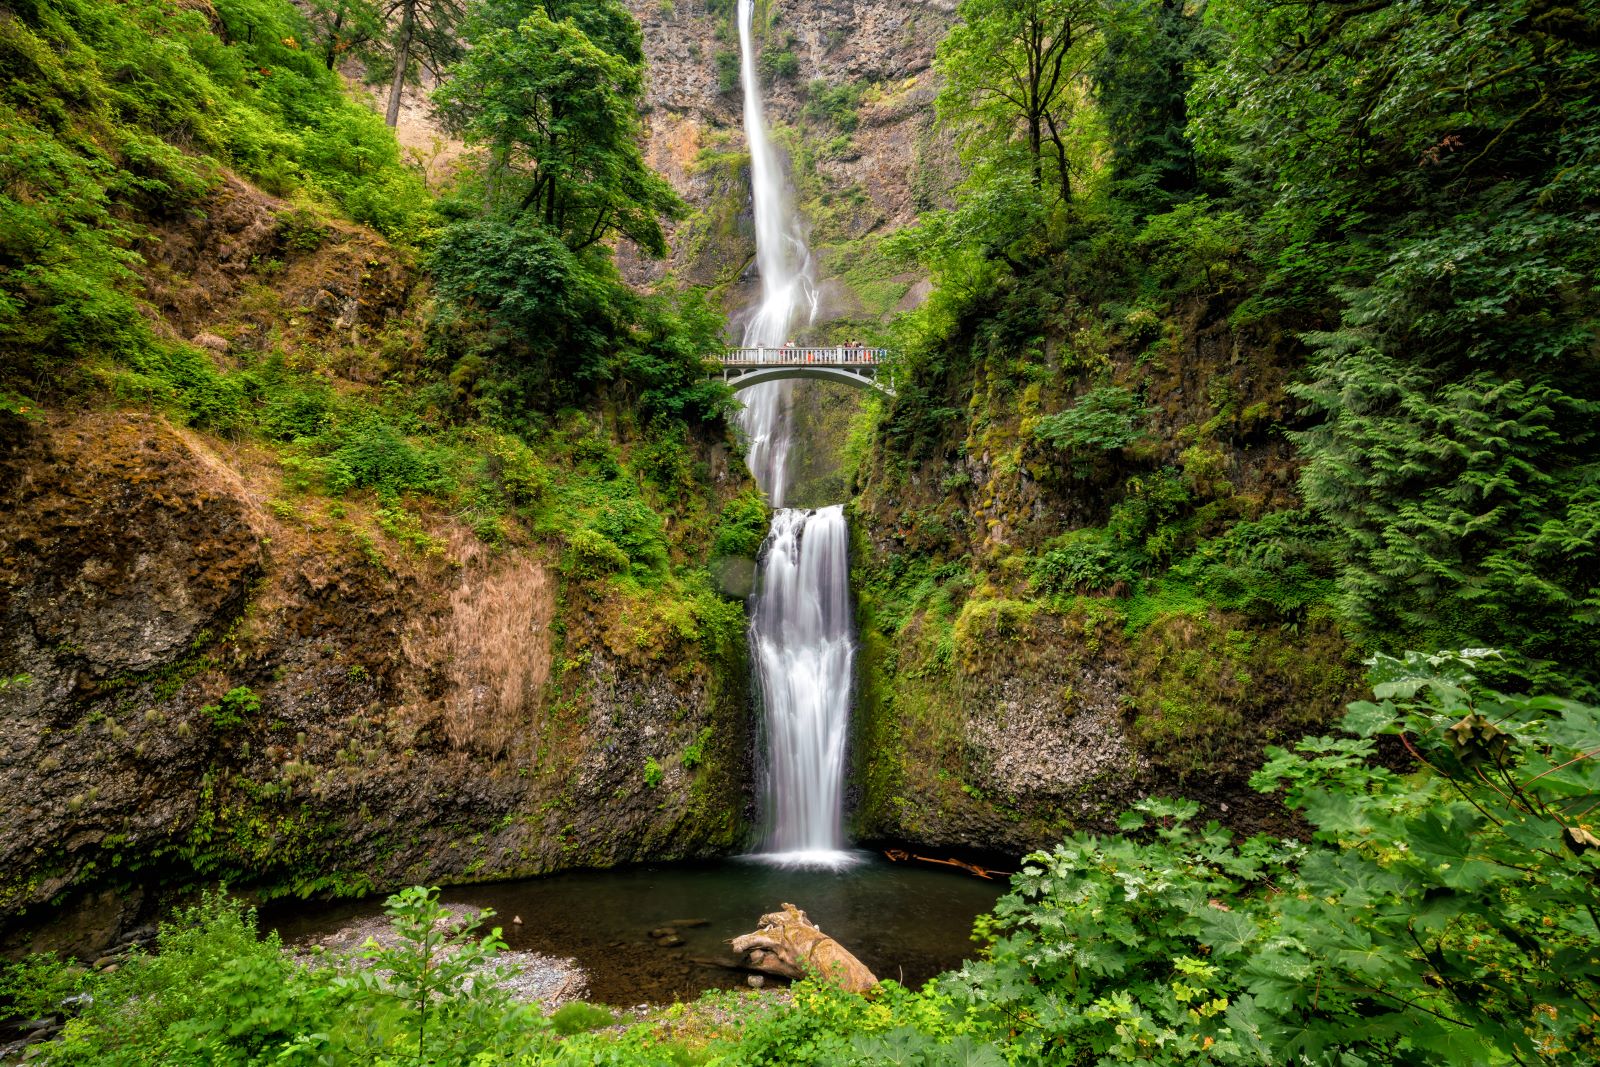 <p class="wp-caption-text">Image Credit: Shutterstock / f11photo</p>  <p>Explore the dramatic landscapes along the Columbia River, with waterfalls, hiking trails, and scenic overlooks.</p>